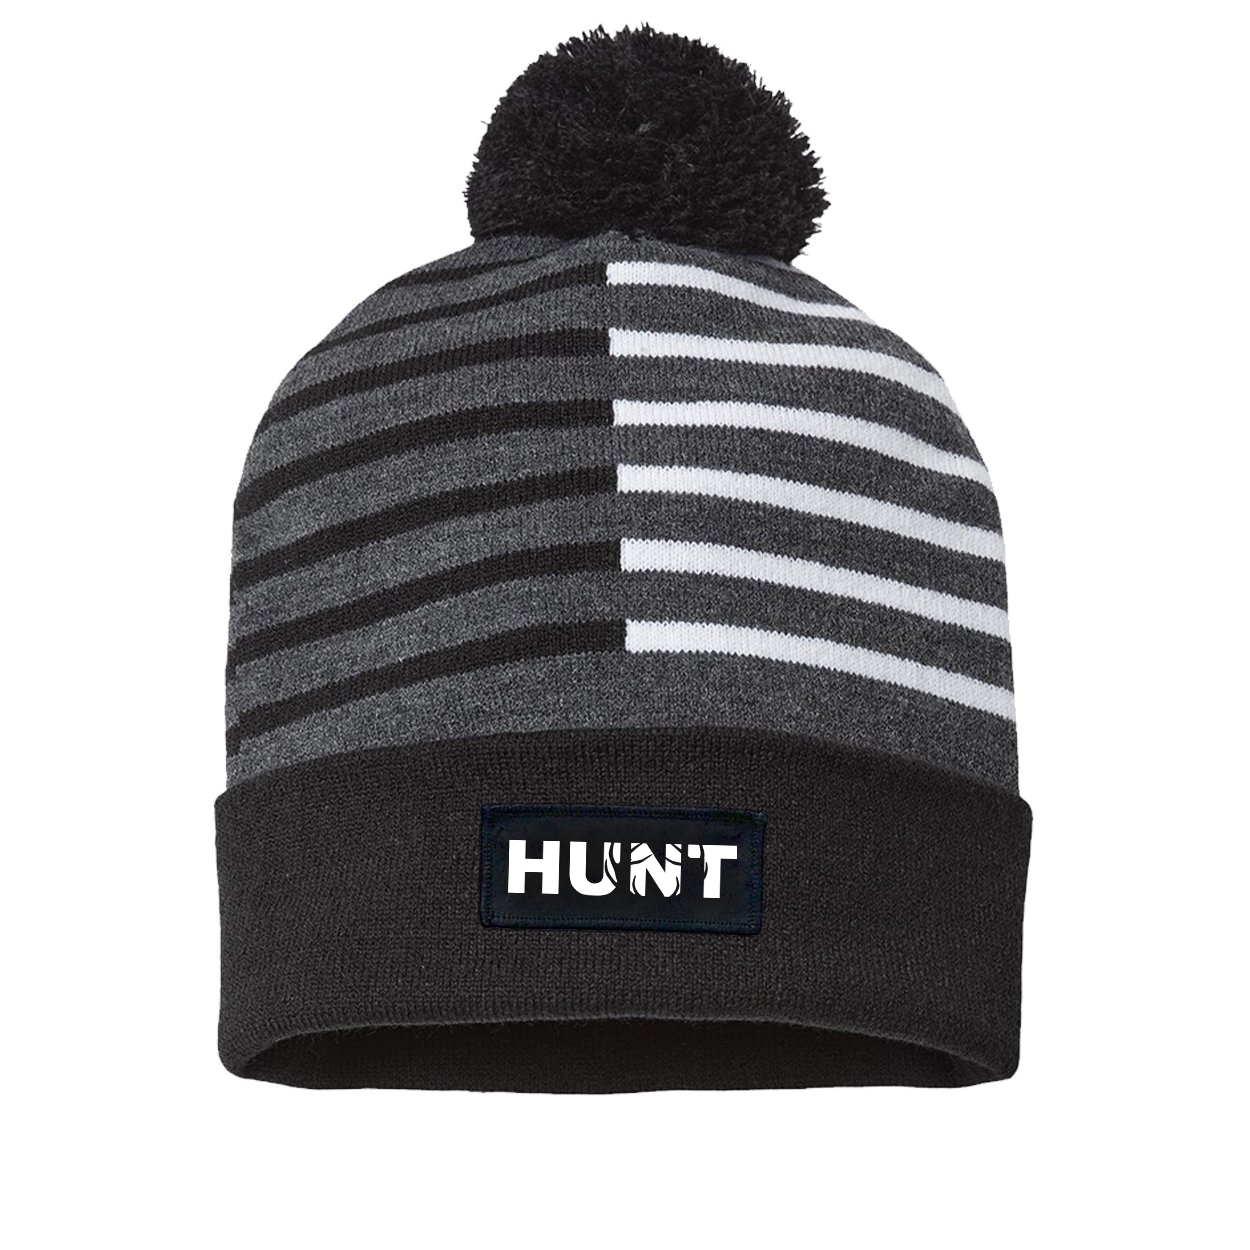 Hunt Rack Logo Night Out Woven Patch Roll Up Pom Knit Beanie Half Color Black/White (White Logo)